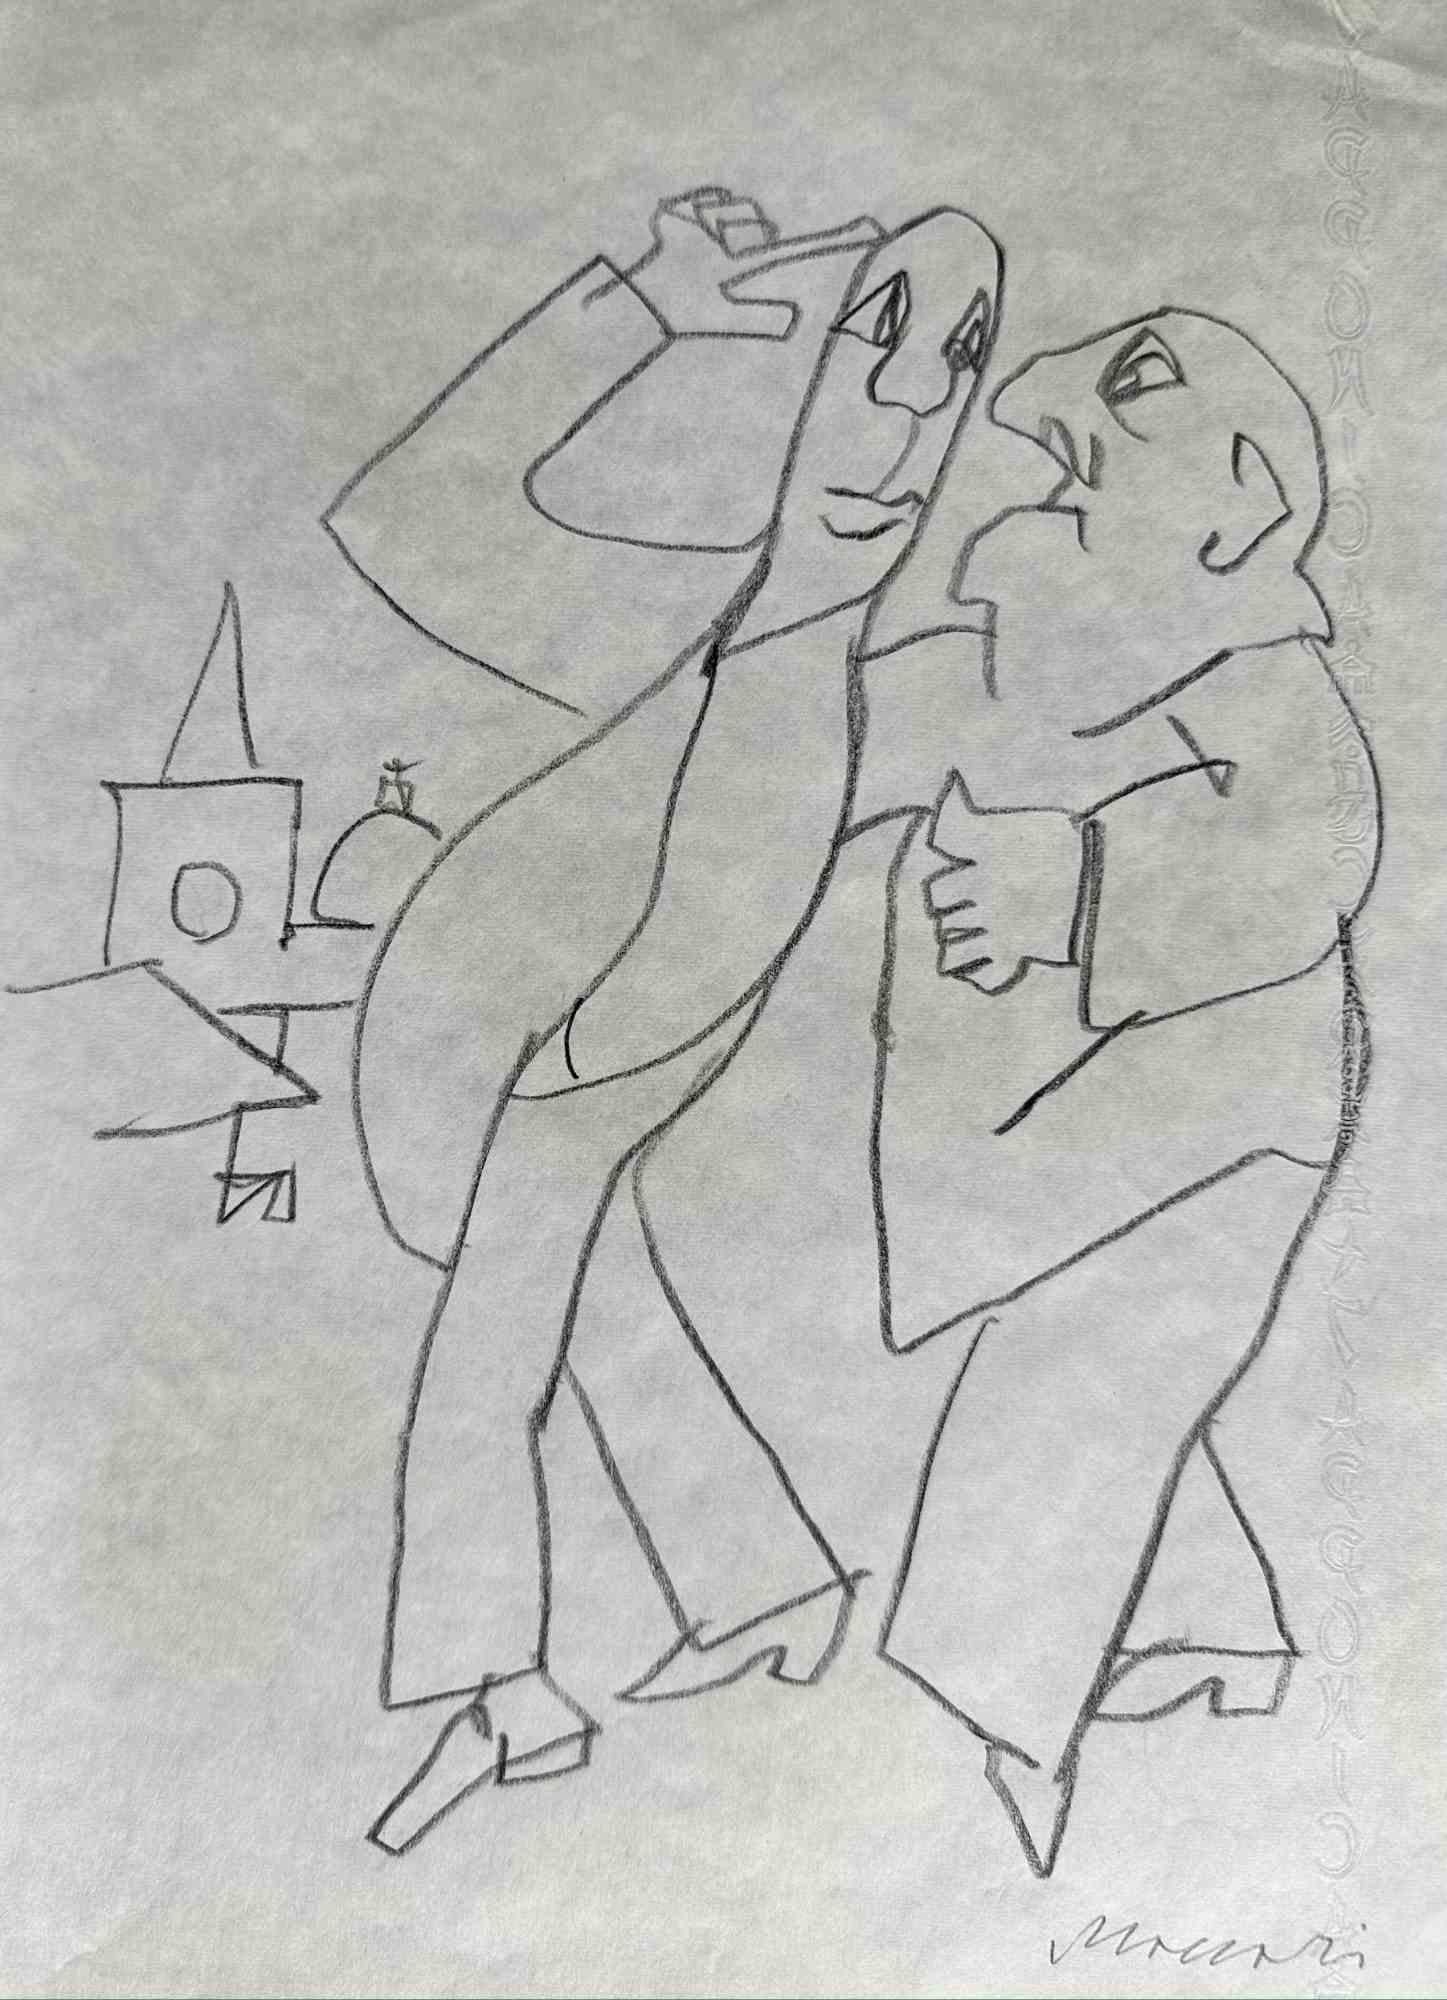 The Conversation is a pencil Drawing realized by Mino Maccari  (1924-1989) in the 1960s.

Hand-signed on the lower.

Good conditions.

Mino Maccari (Siena, 1924-Rome, June 16, 1989) was an Italian writer, painter, engraver and journalist, winner of